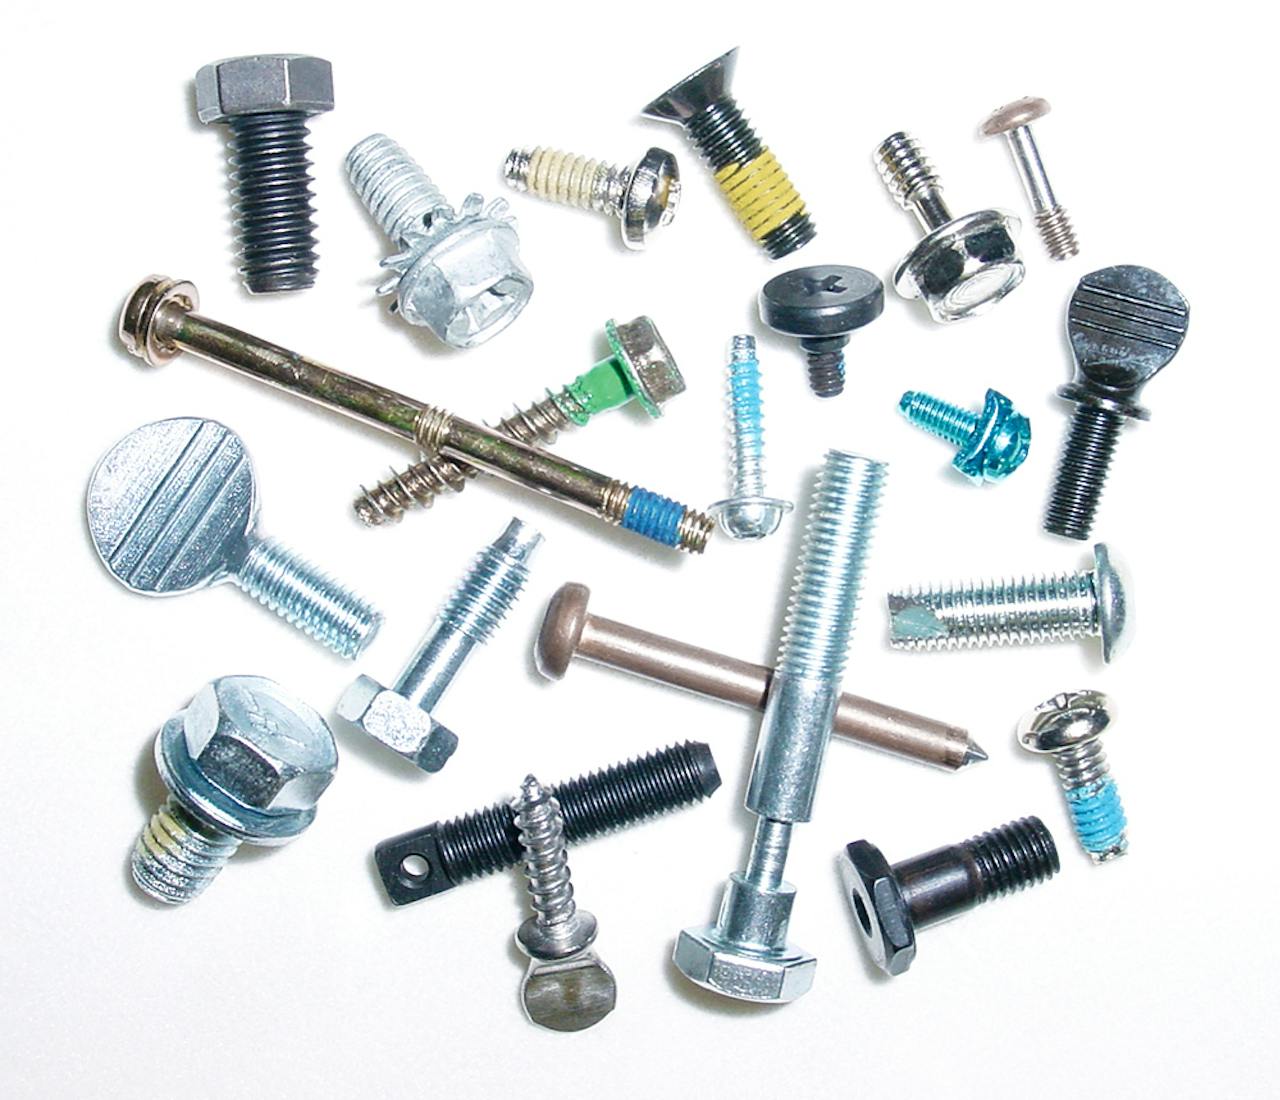 MW Components - Custom fastening solutions